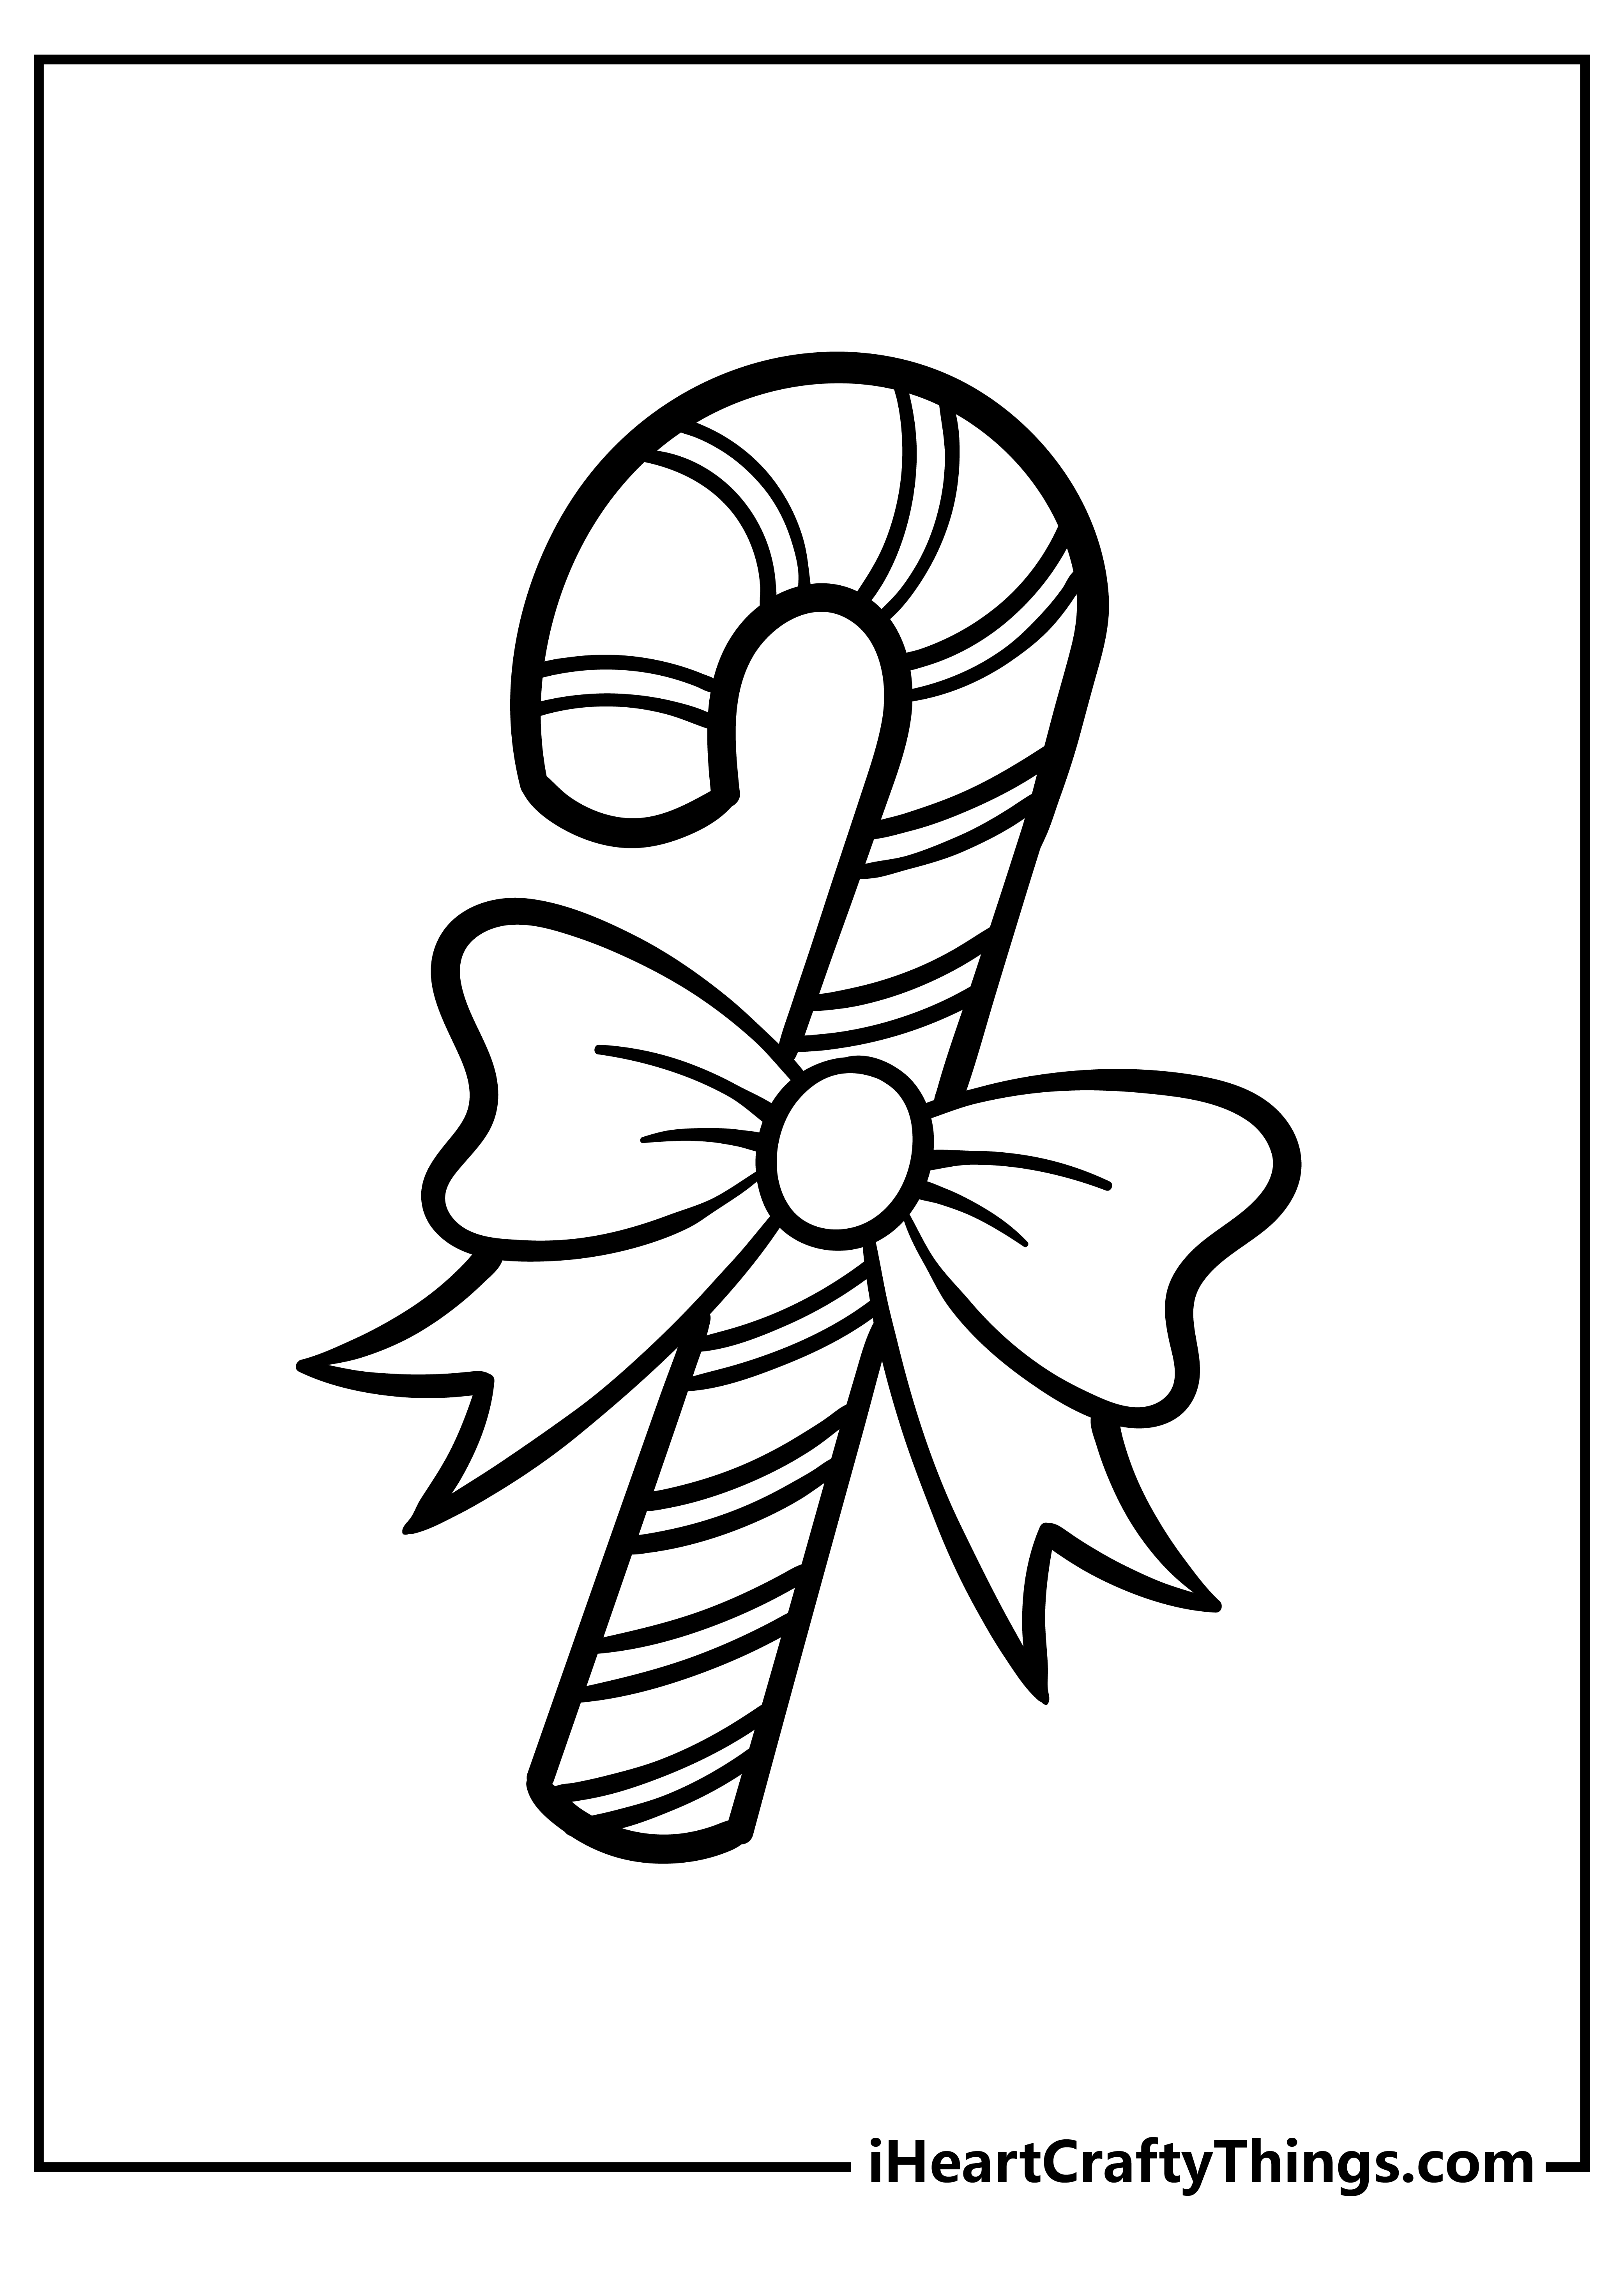 Candy Cane Coloring Pages for adults free printable